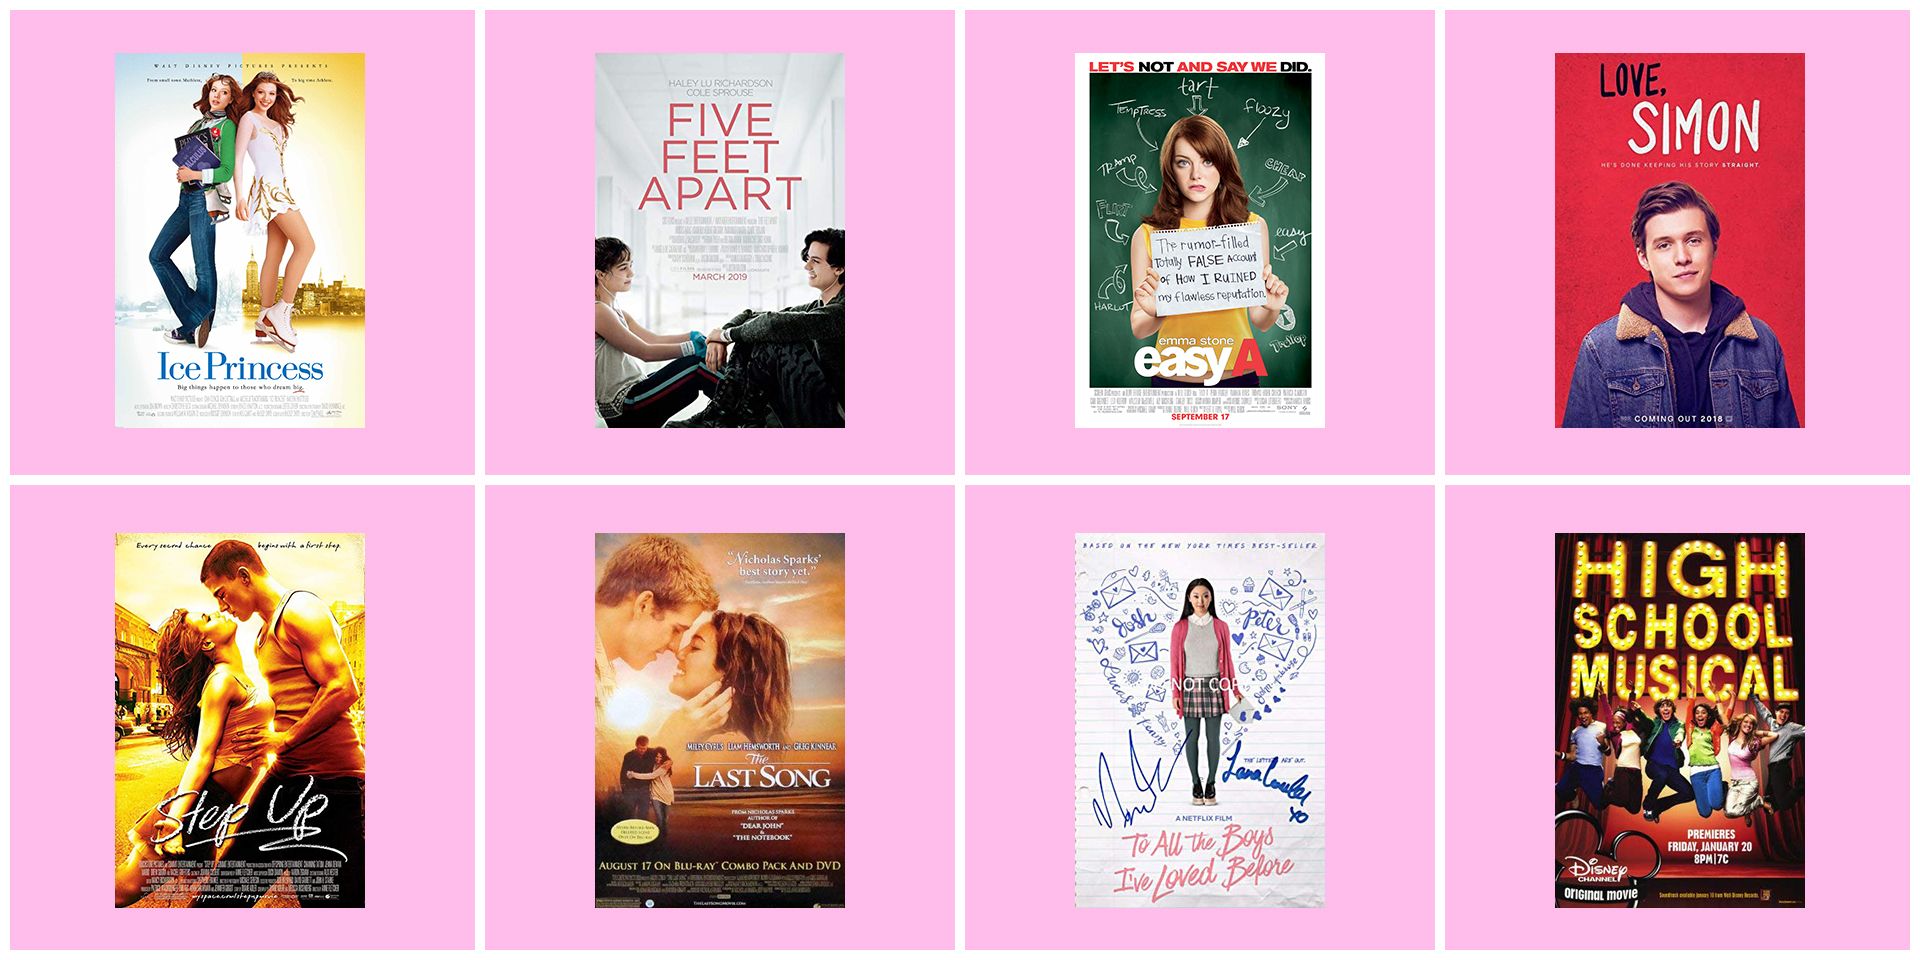 30 Best Teen Romance Movies Of All Time - Top Teen Love Story Films